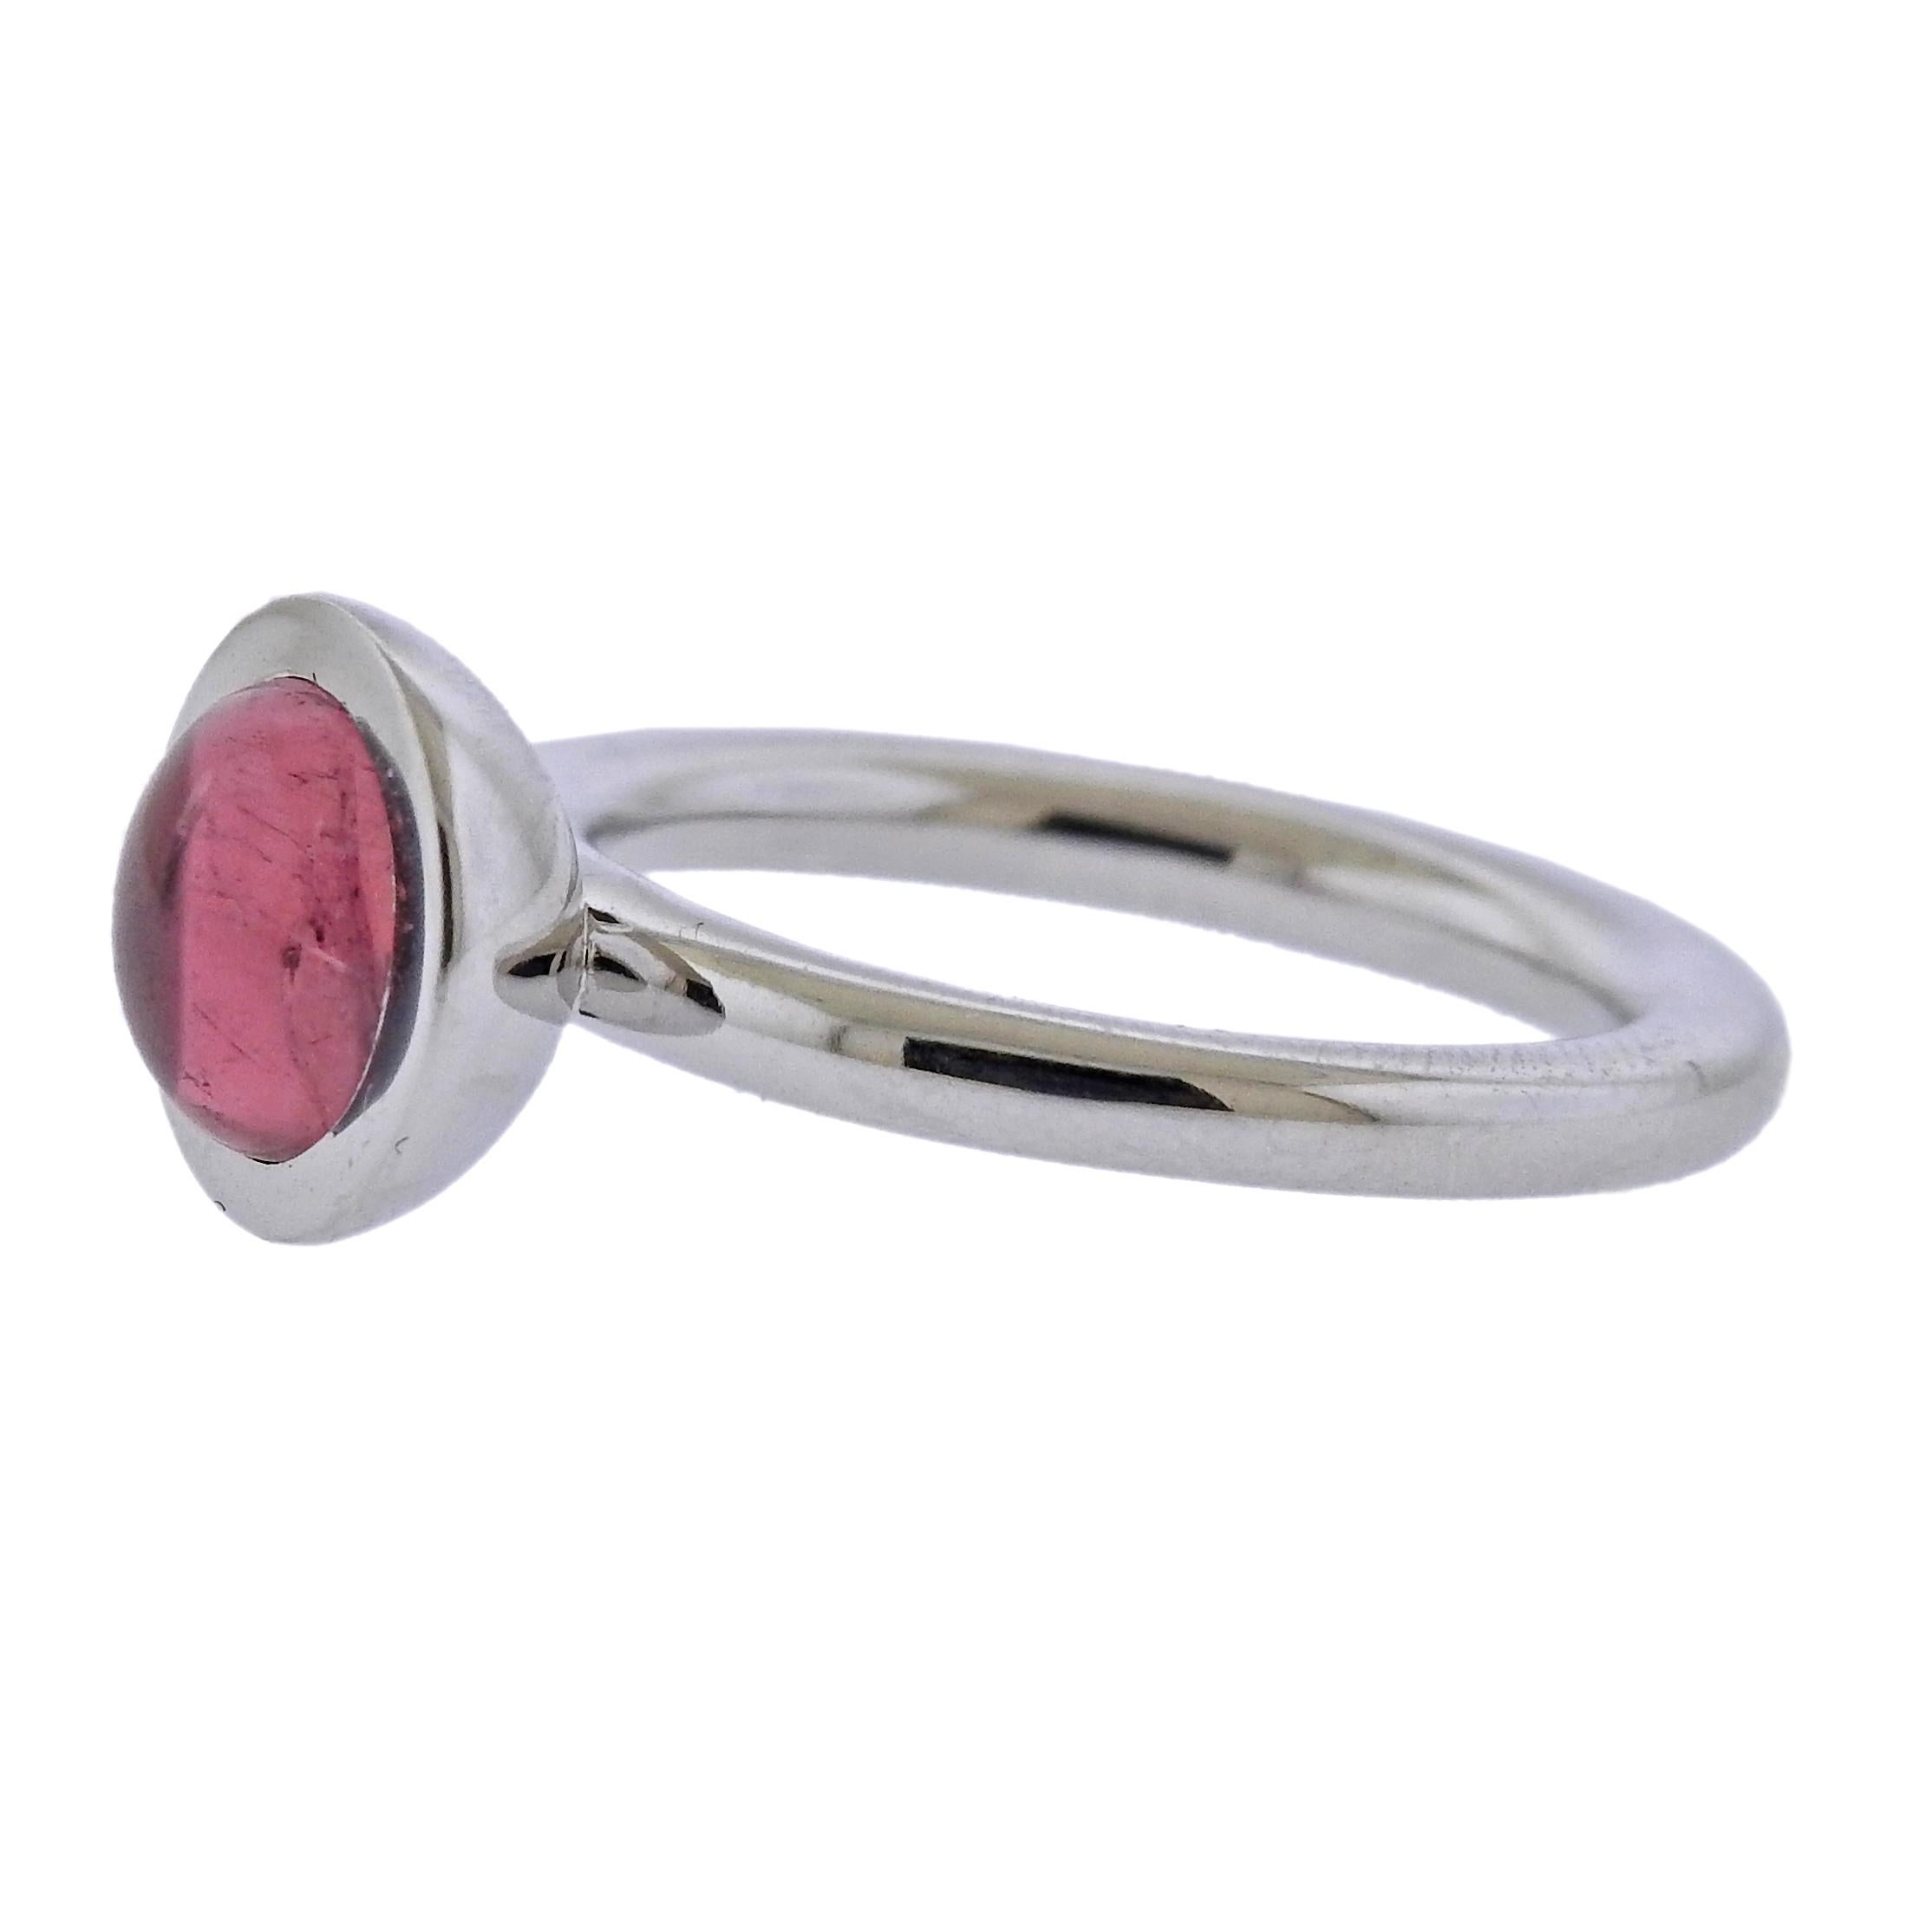 Brand new with tag Bucherer ring, in 18k gold, with 2.75ct pink tourmaline. Retail $2630. Comes with box.  Ring size - 7, ring top is 11mm in diameter. Weight - 8.2 grams. Marked CB 750.